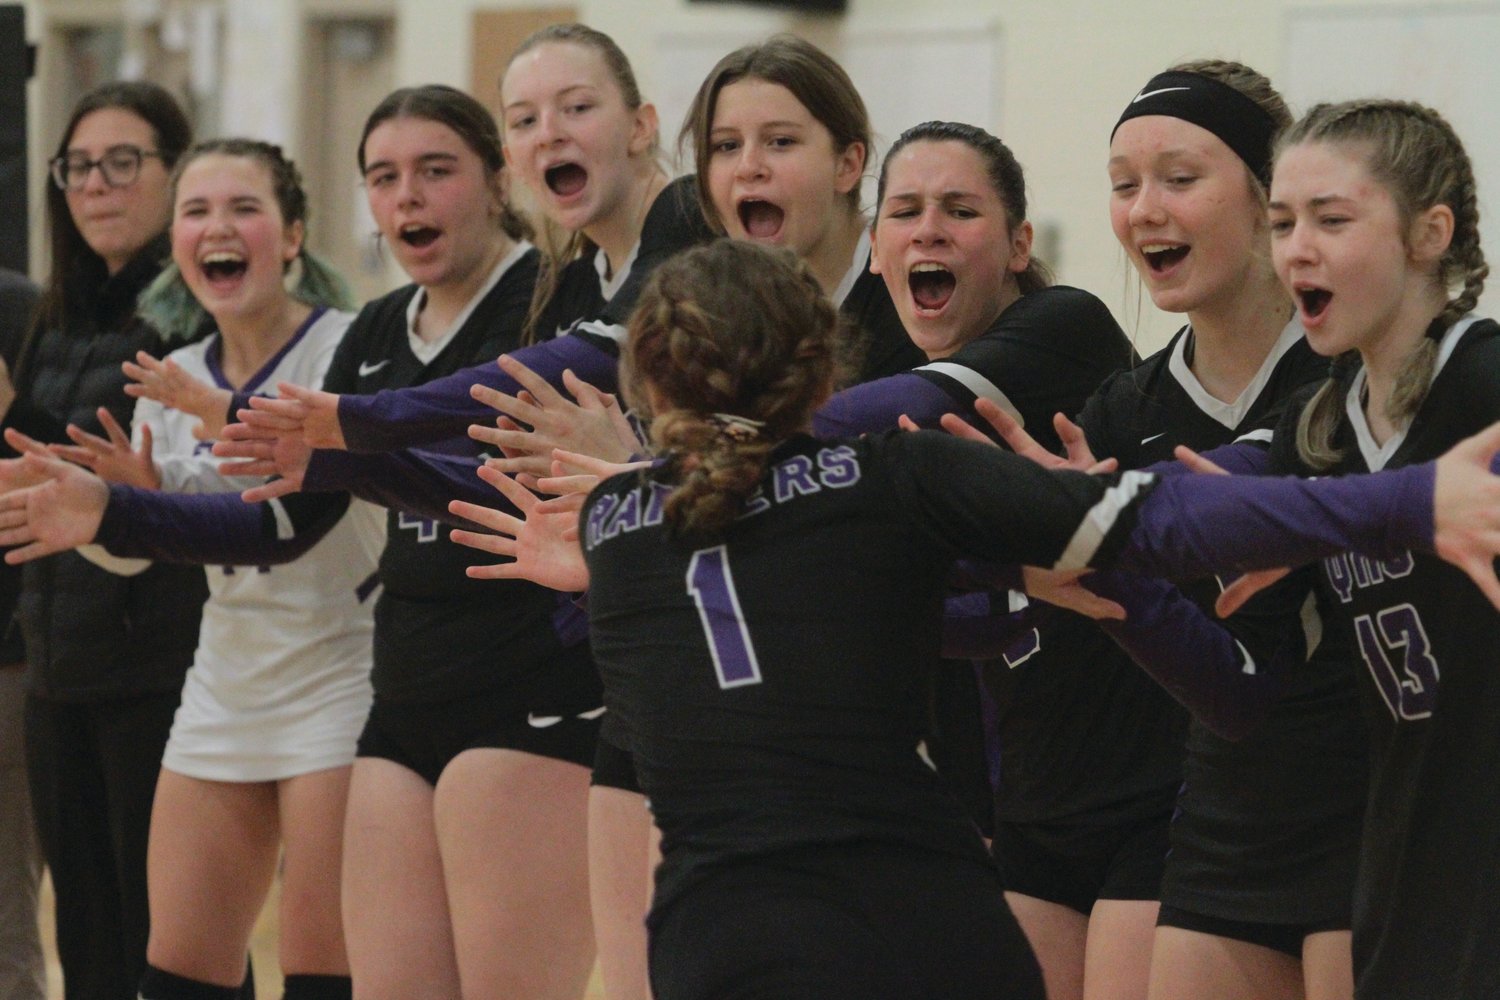 Abigail Ward gets an enthusiastic sendoff from her teammates as the starters are introduced in the district tournament.